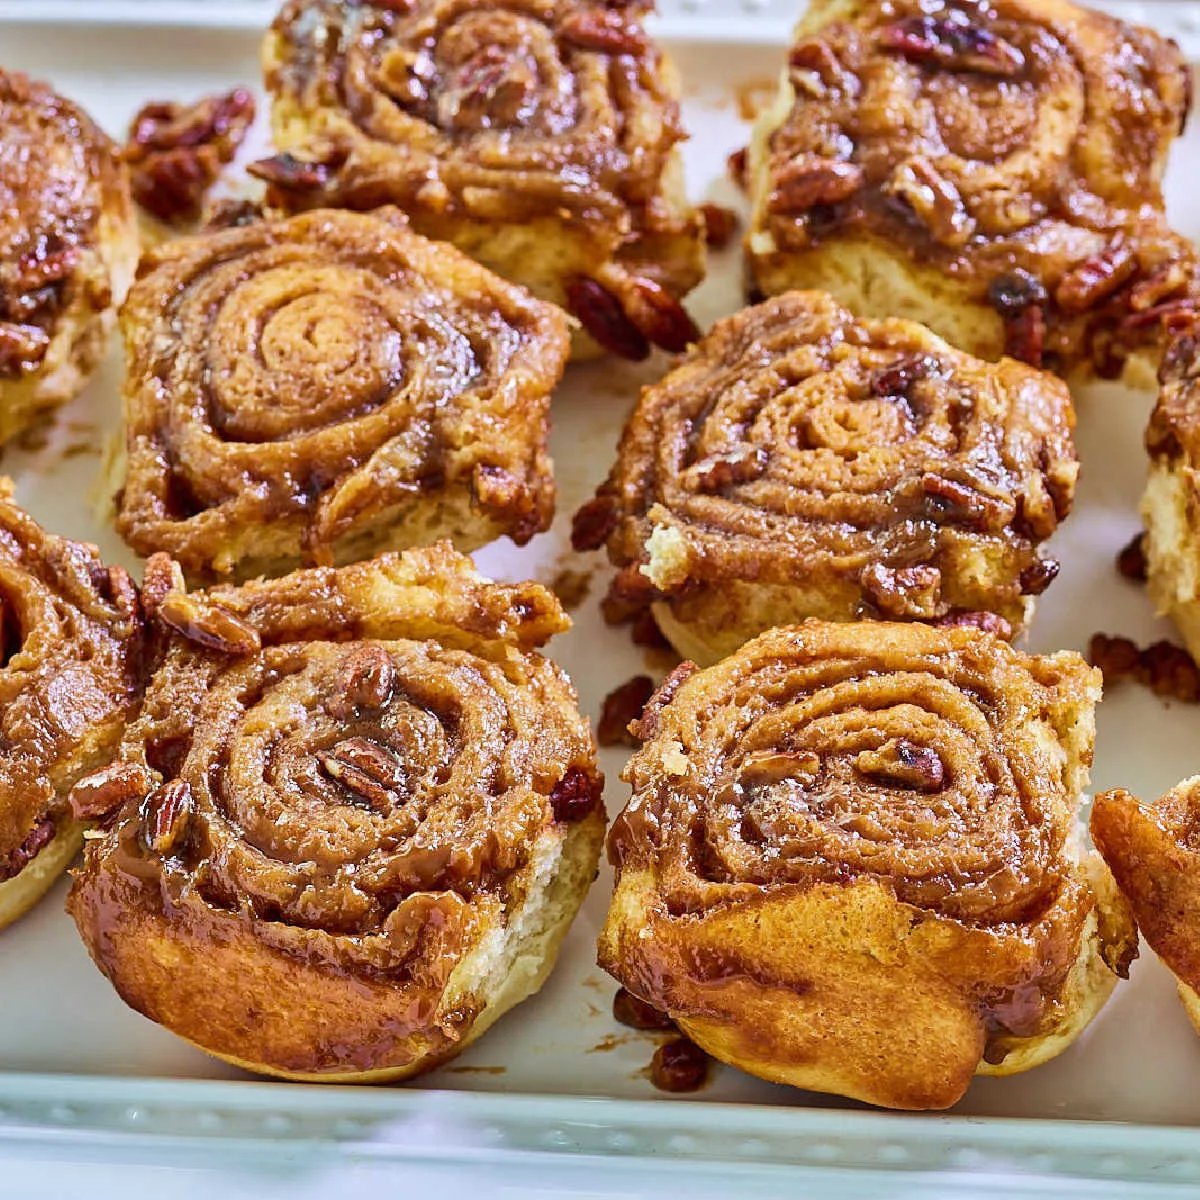 Tray of caramel pecan rolls showing the cinnamon filling spiral, soft dough, gooey caramel, and chopped pecans, ready to eat.